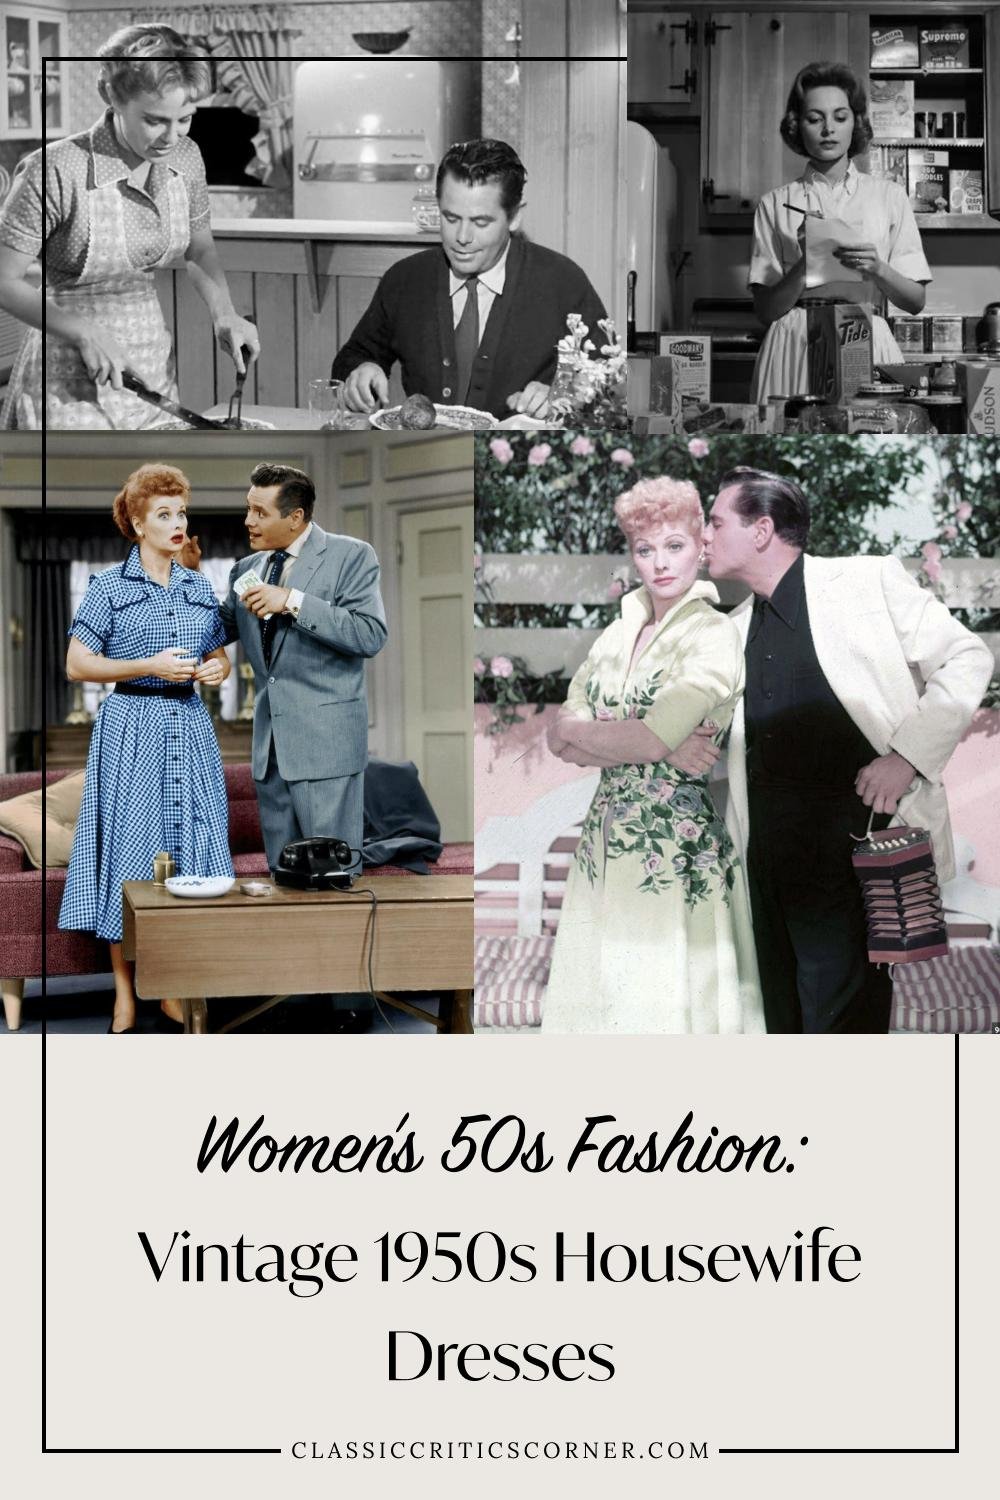 Women's 50s Fashion: Vintage 1950s Housewife Dresses — Classic Critics  Corner - Vintage Fashion Inspiration including 1940s Fashion, 1950s Fashion  and Old Hollywood Glam icons like Grace Kelly, Audrey Hepburn and Marilyn  Monroe.